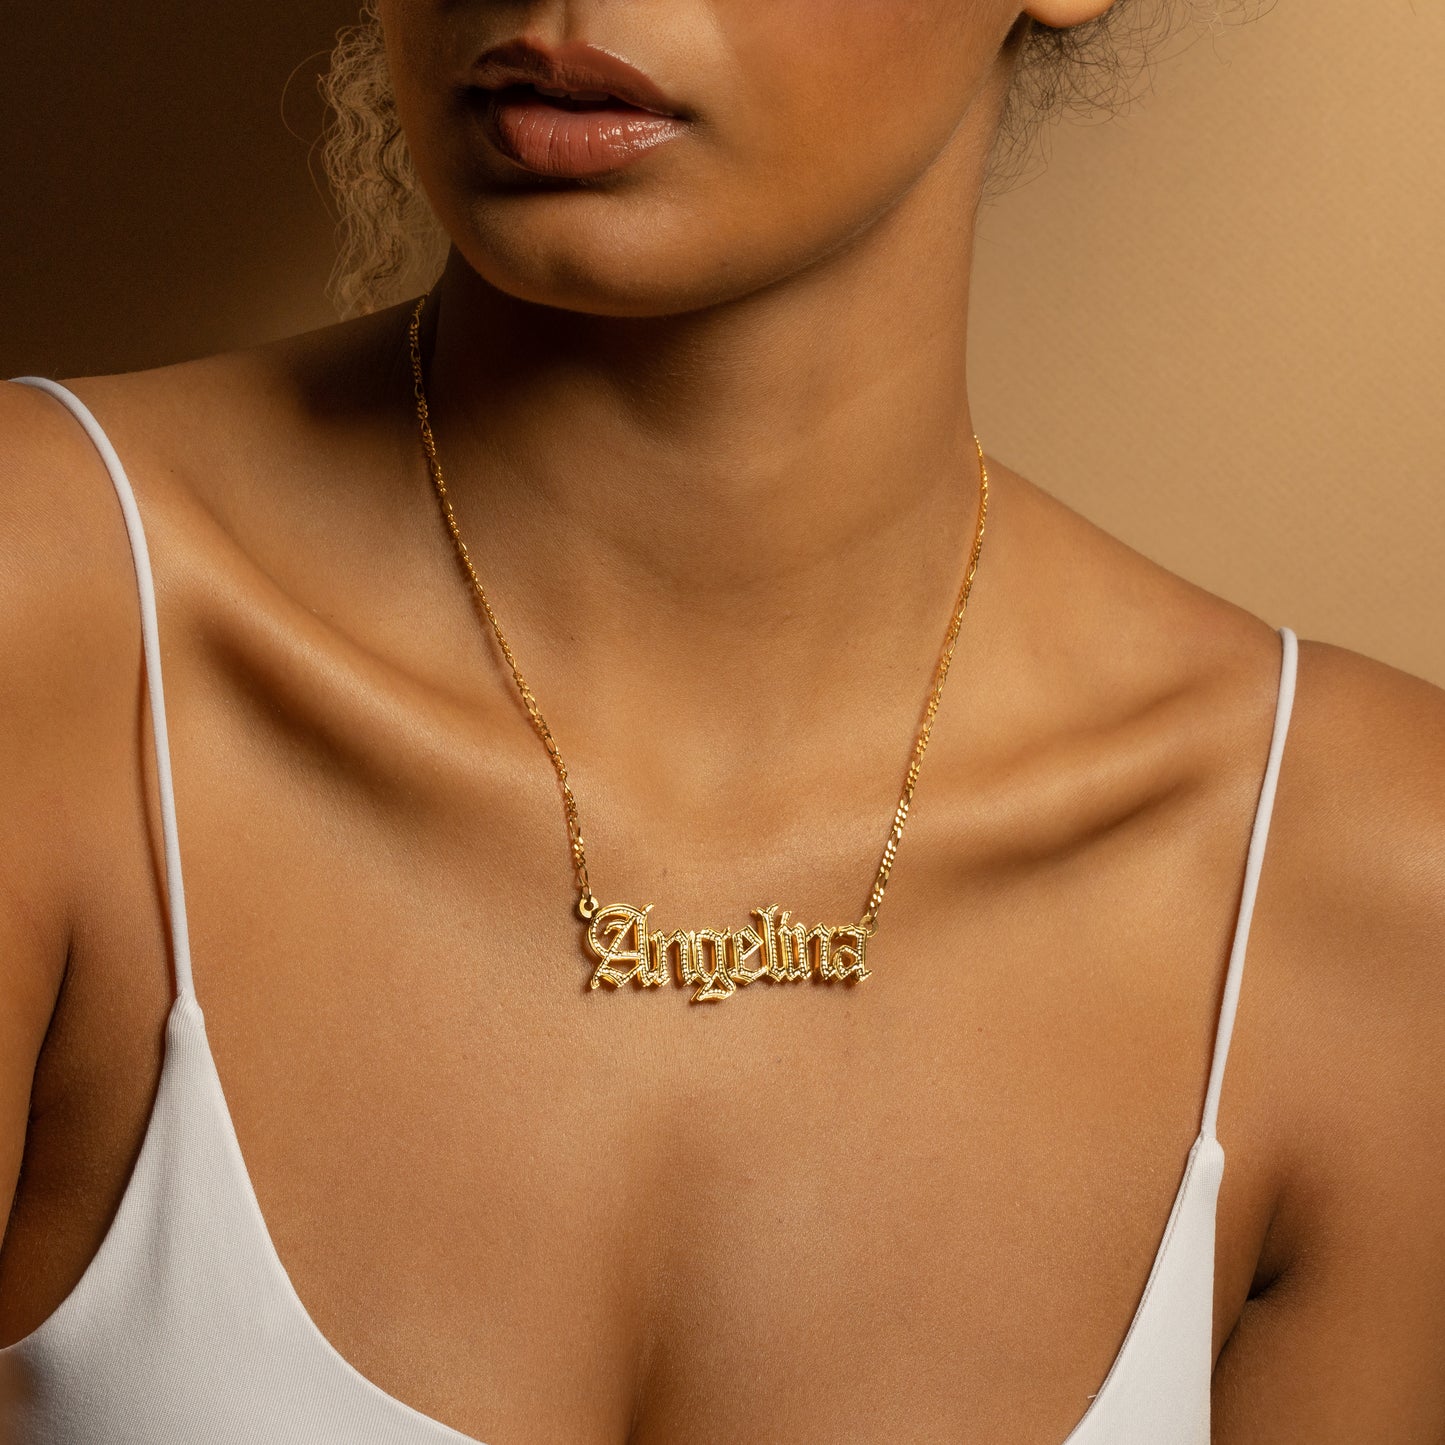 The Golden Double Plated Gothic Name Necklace